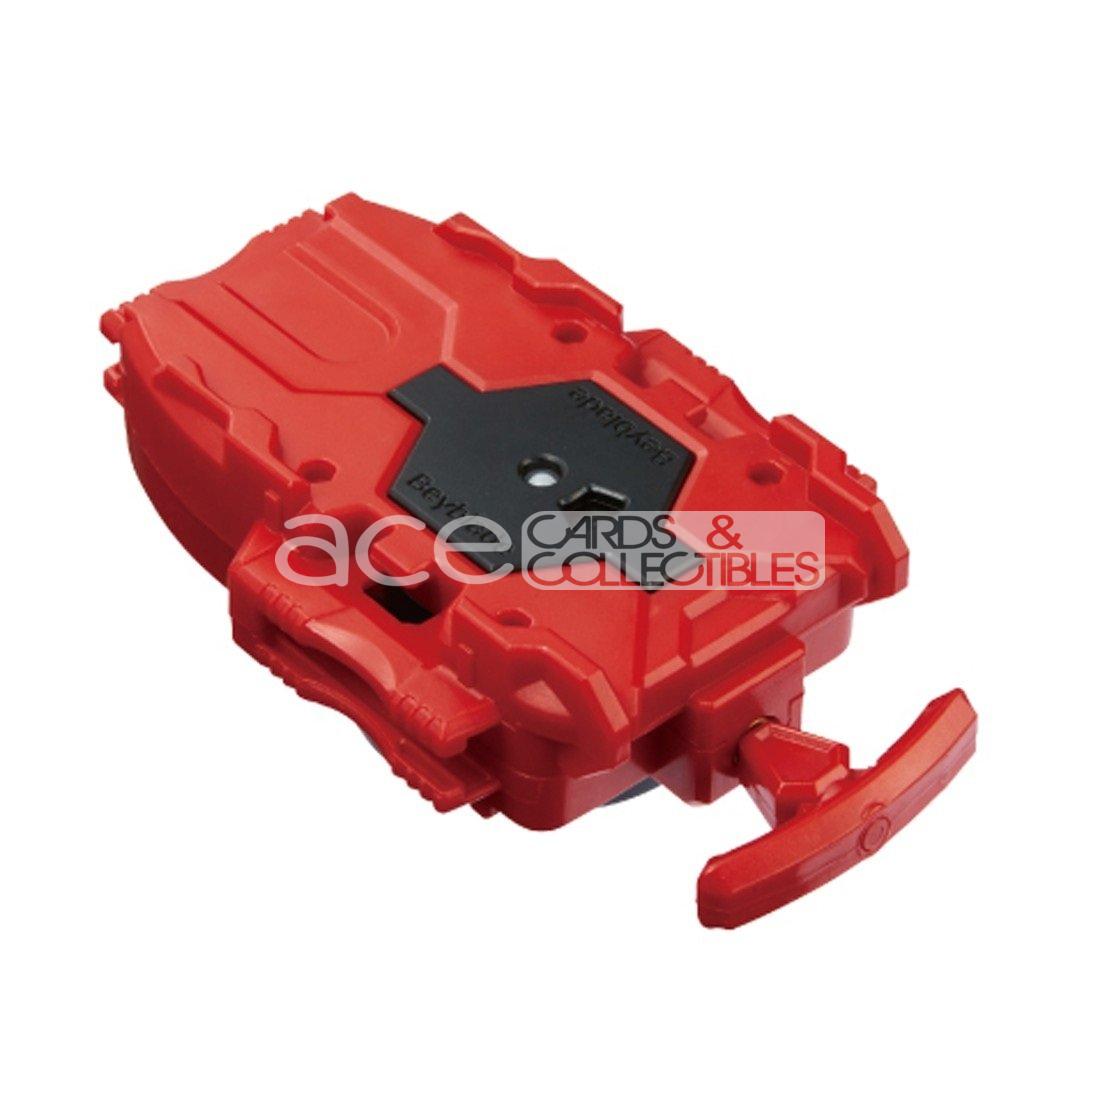 Beyblade Burst B-108 Bey Launcher Red-Takara Tomy-Ace Cards &amp; Collectibles